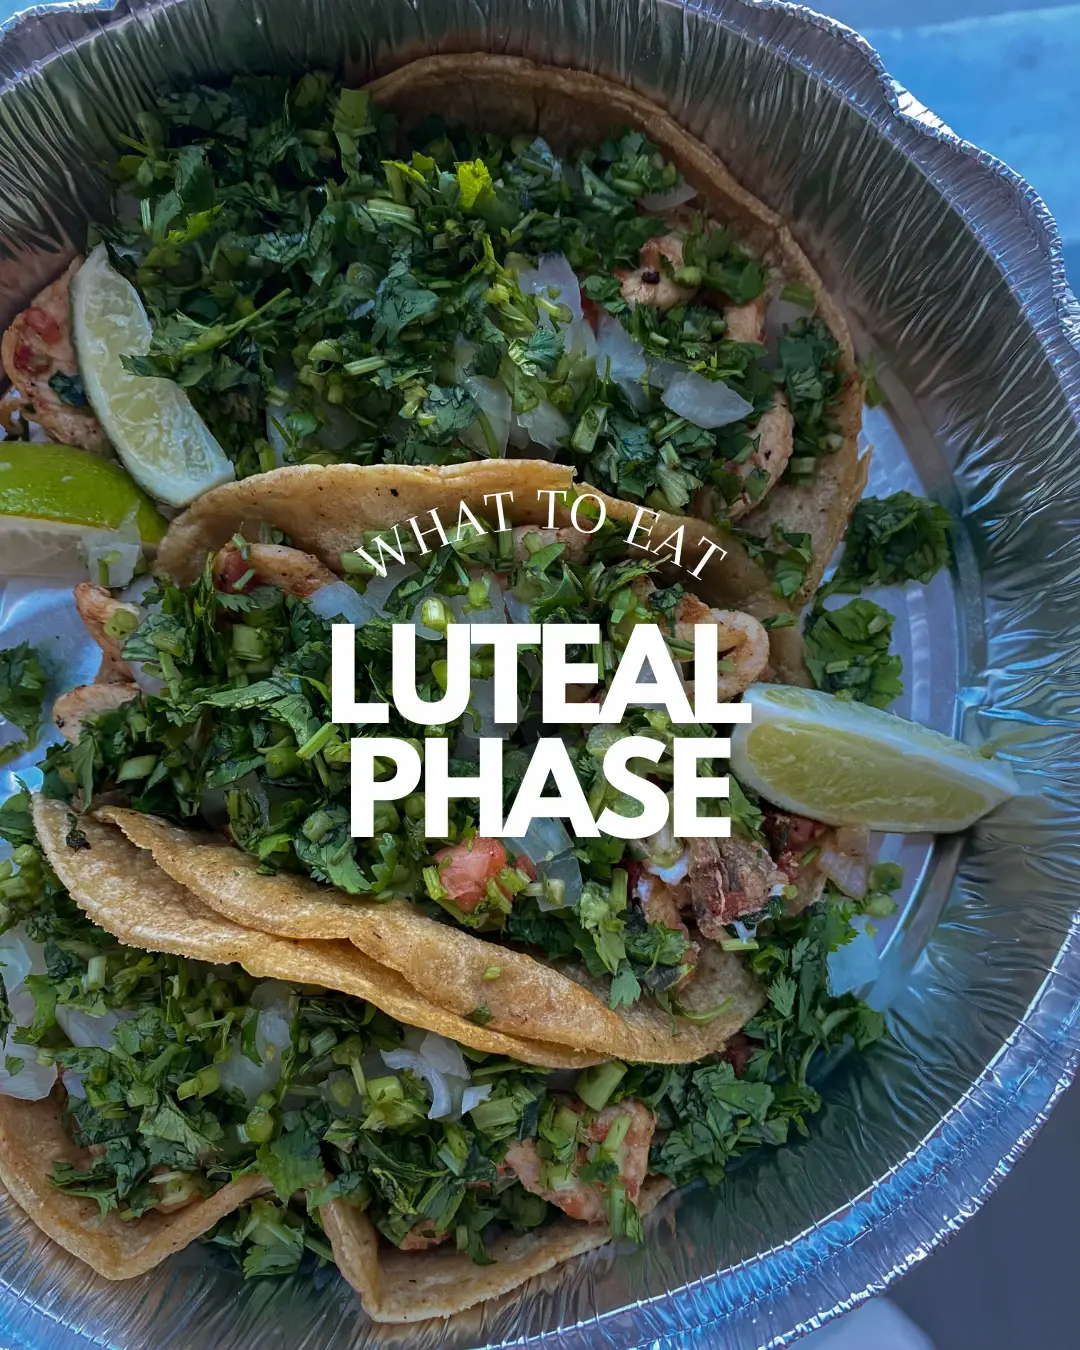 Best Foods Luteal Phase - Lemon8 Search